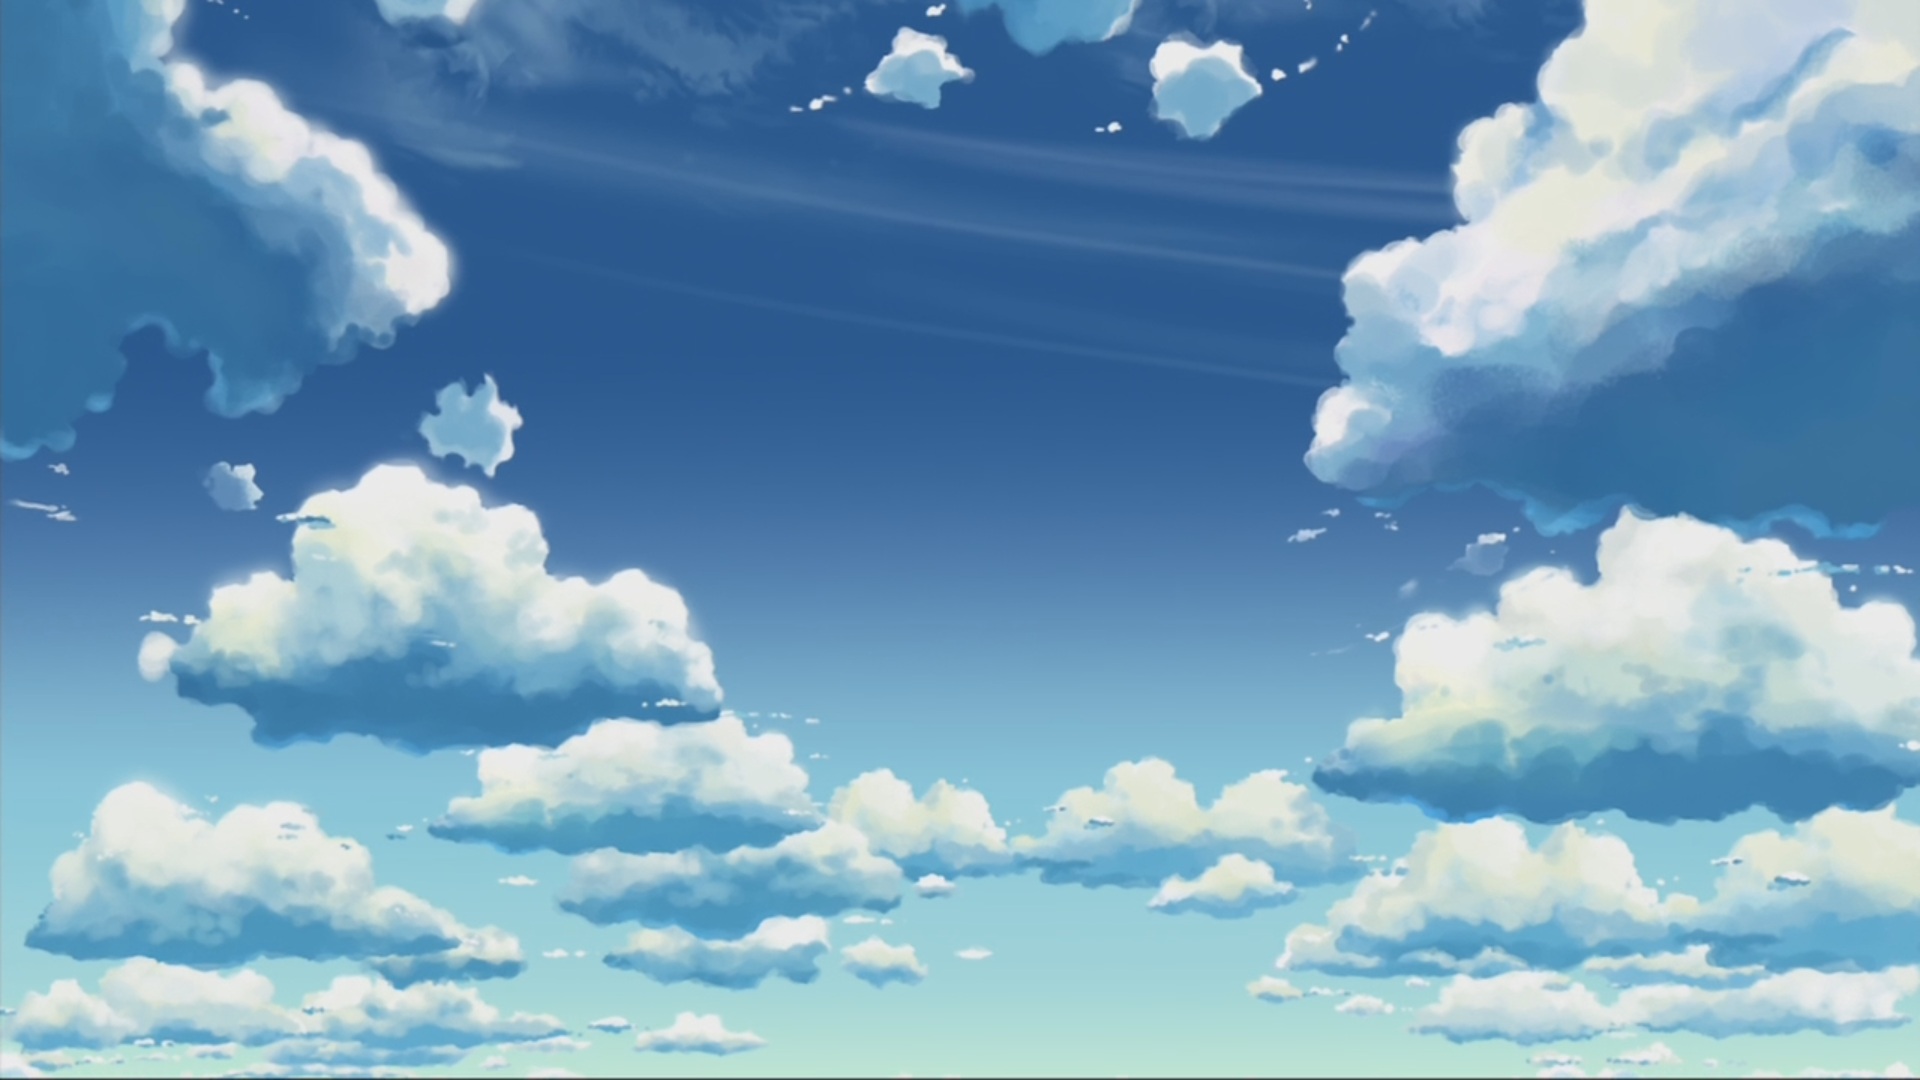 Anime Scenery Cool Wallpapers I HD Images 1920x1080